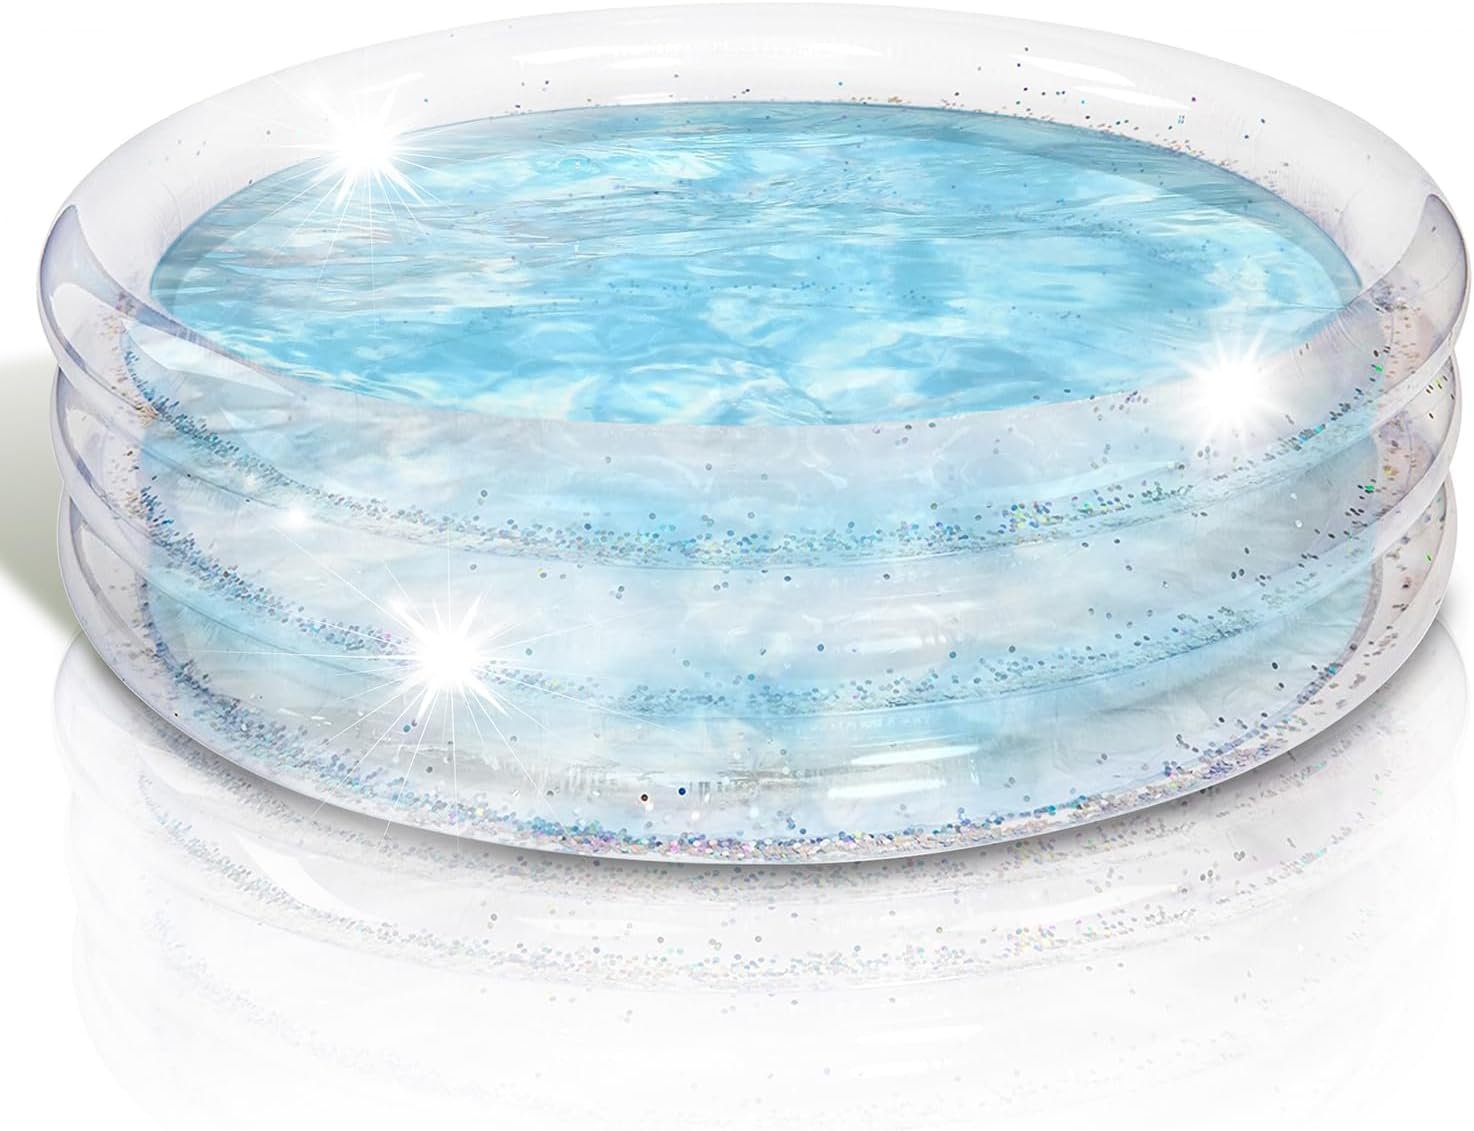 Sparkly Inflatable Kiddie Pool for Kids - 3 Levels - Transparent Blow Up Kiddie Pool with Silver Glitter and Cushioned Bottom, Easy to Inflate Small Kiddie Pools for Backyard